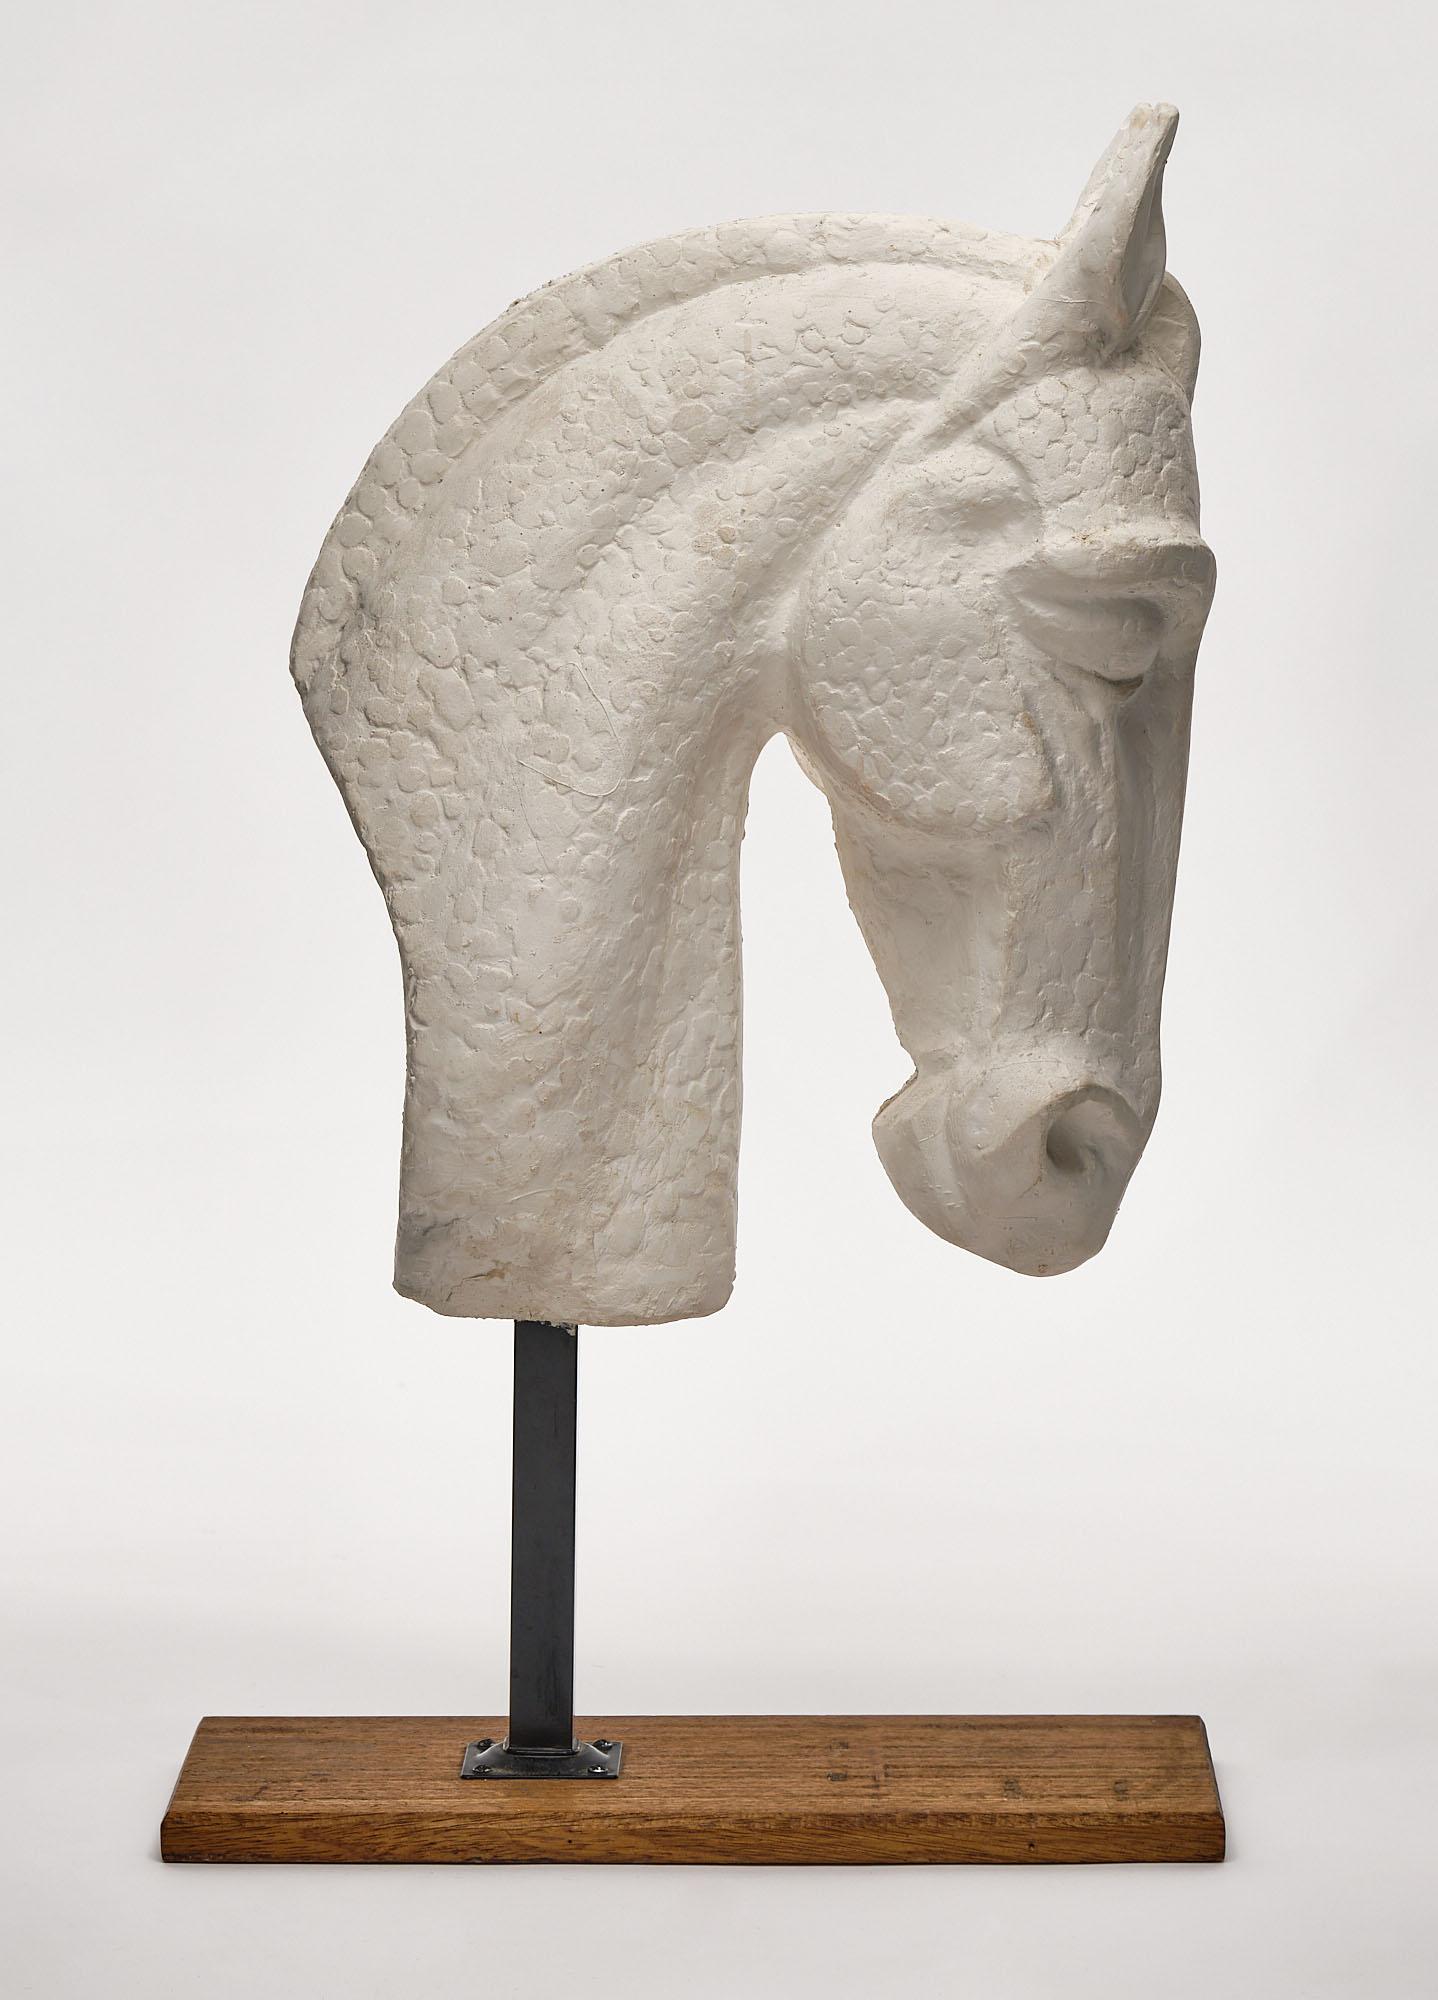 Horse head sculpture from France made of white plaster. This piece rests on an iron and natural wood stand.